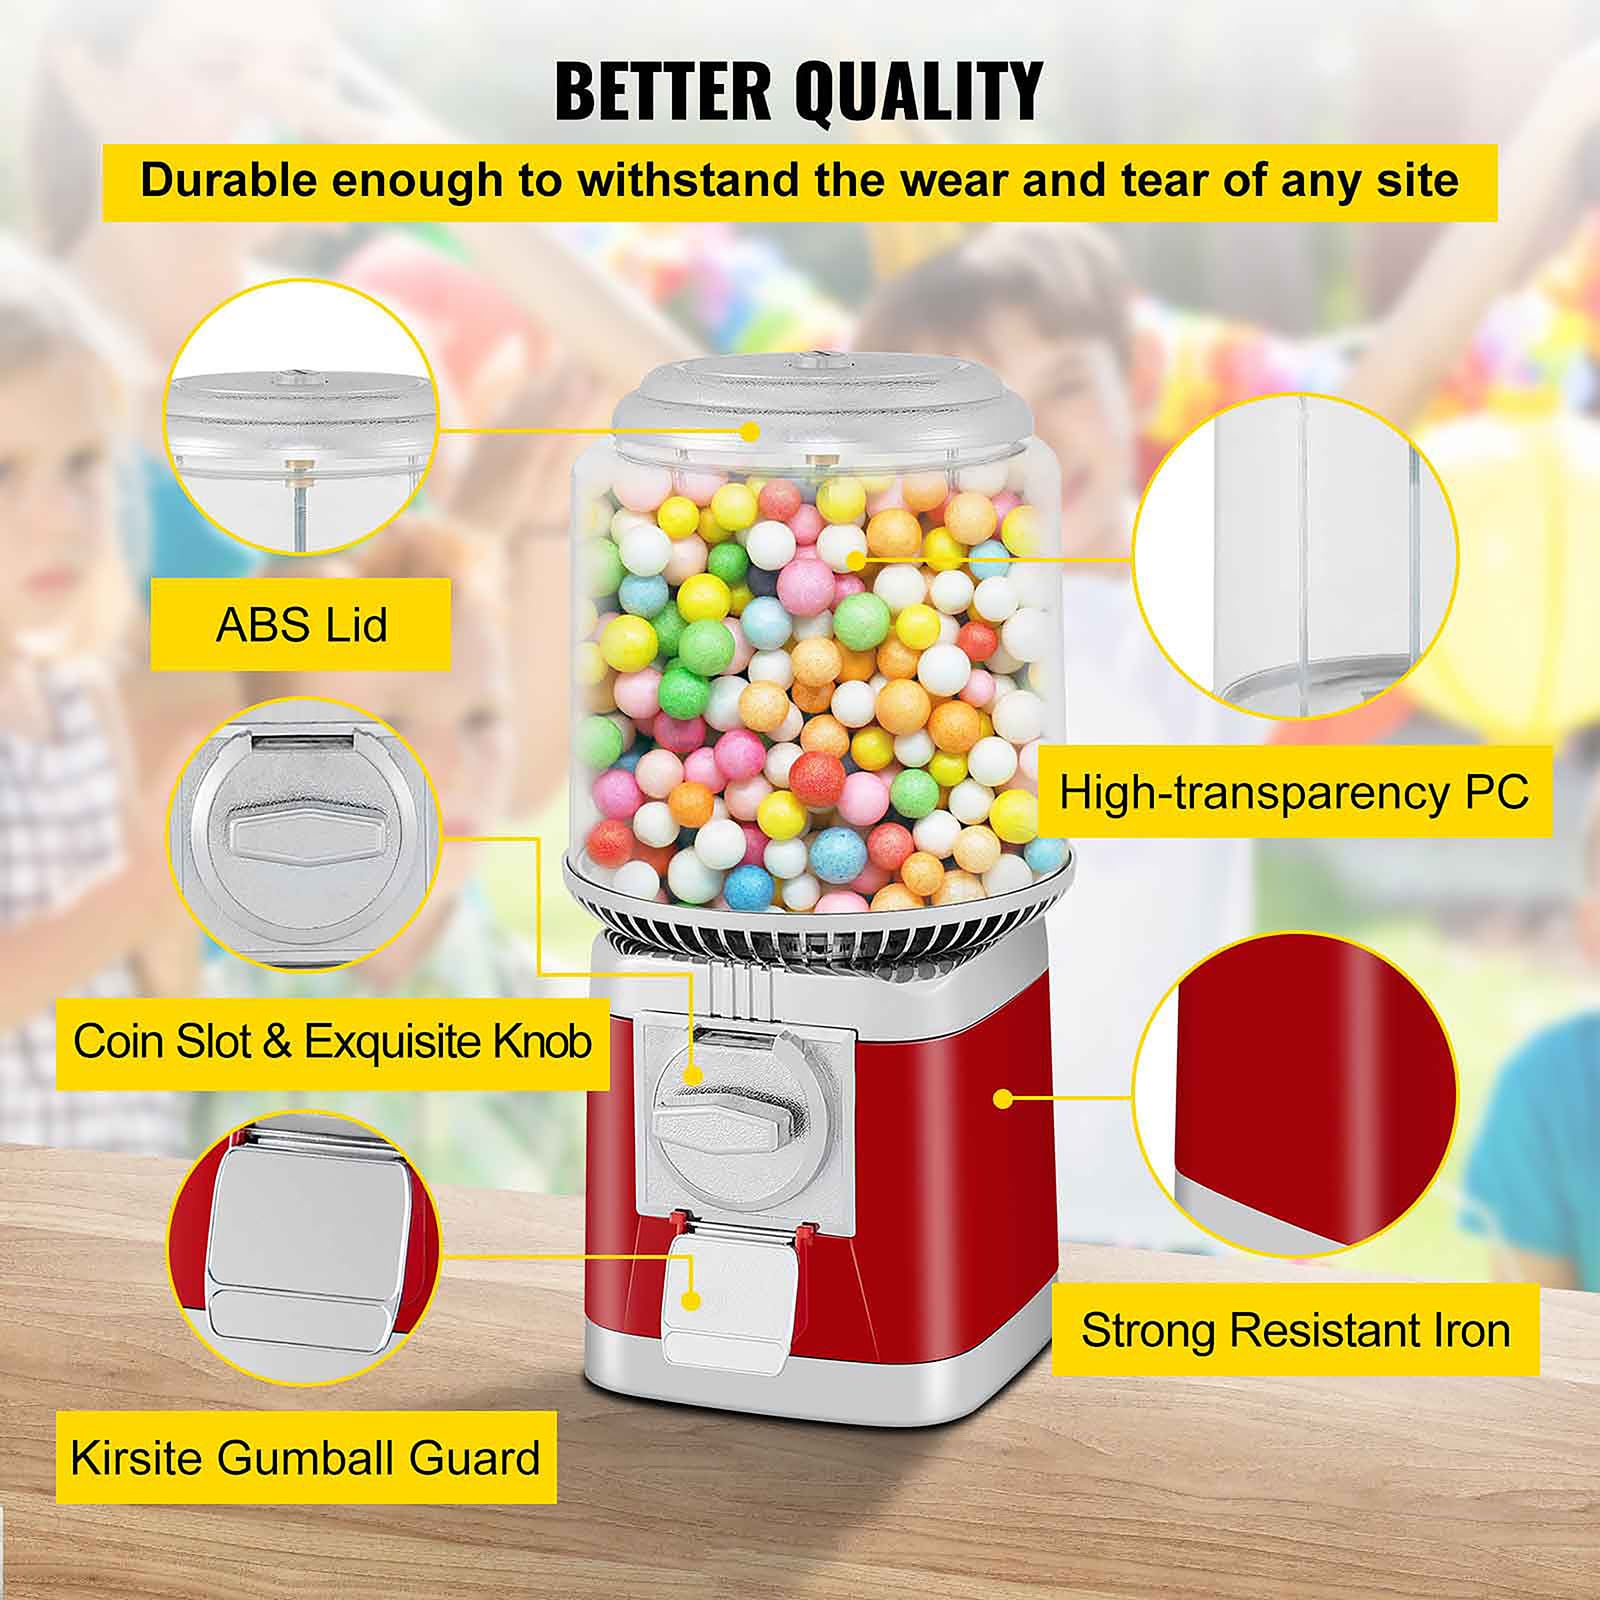 VEVOR 0.7-1.3 INCH Gumball Machine - Red, Commercial/Residential